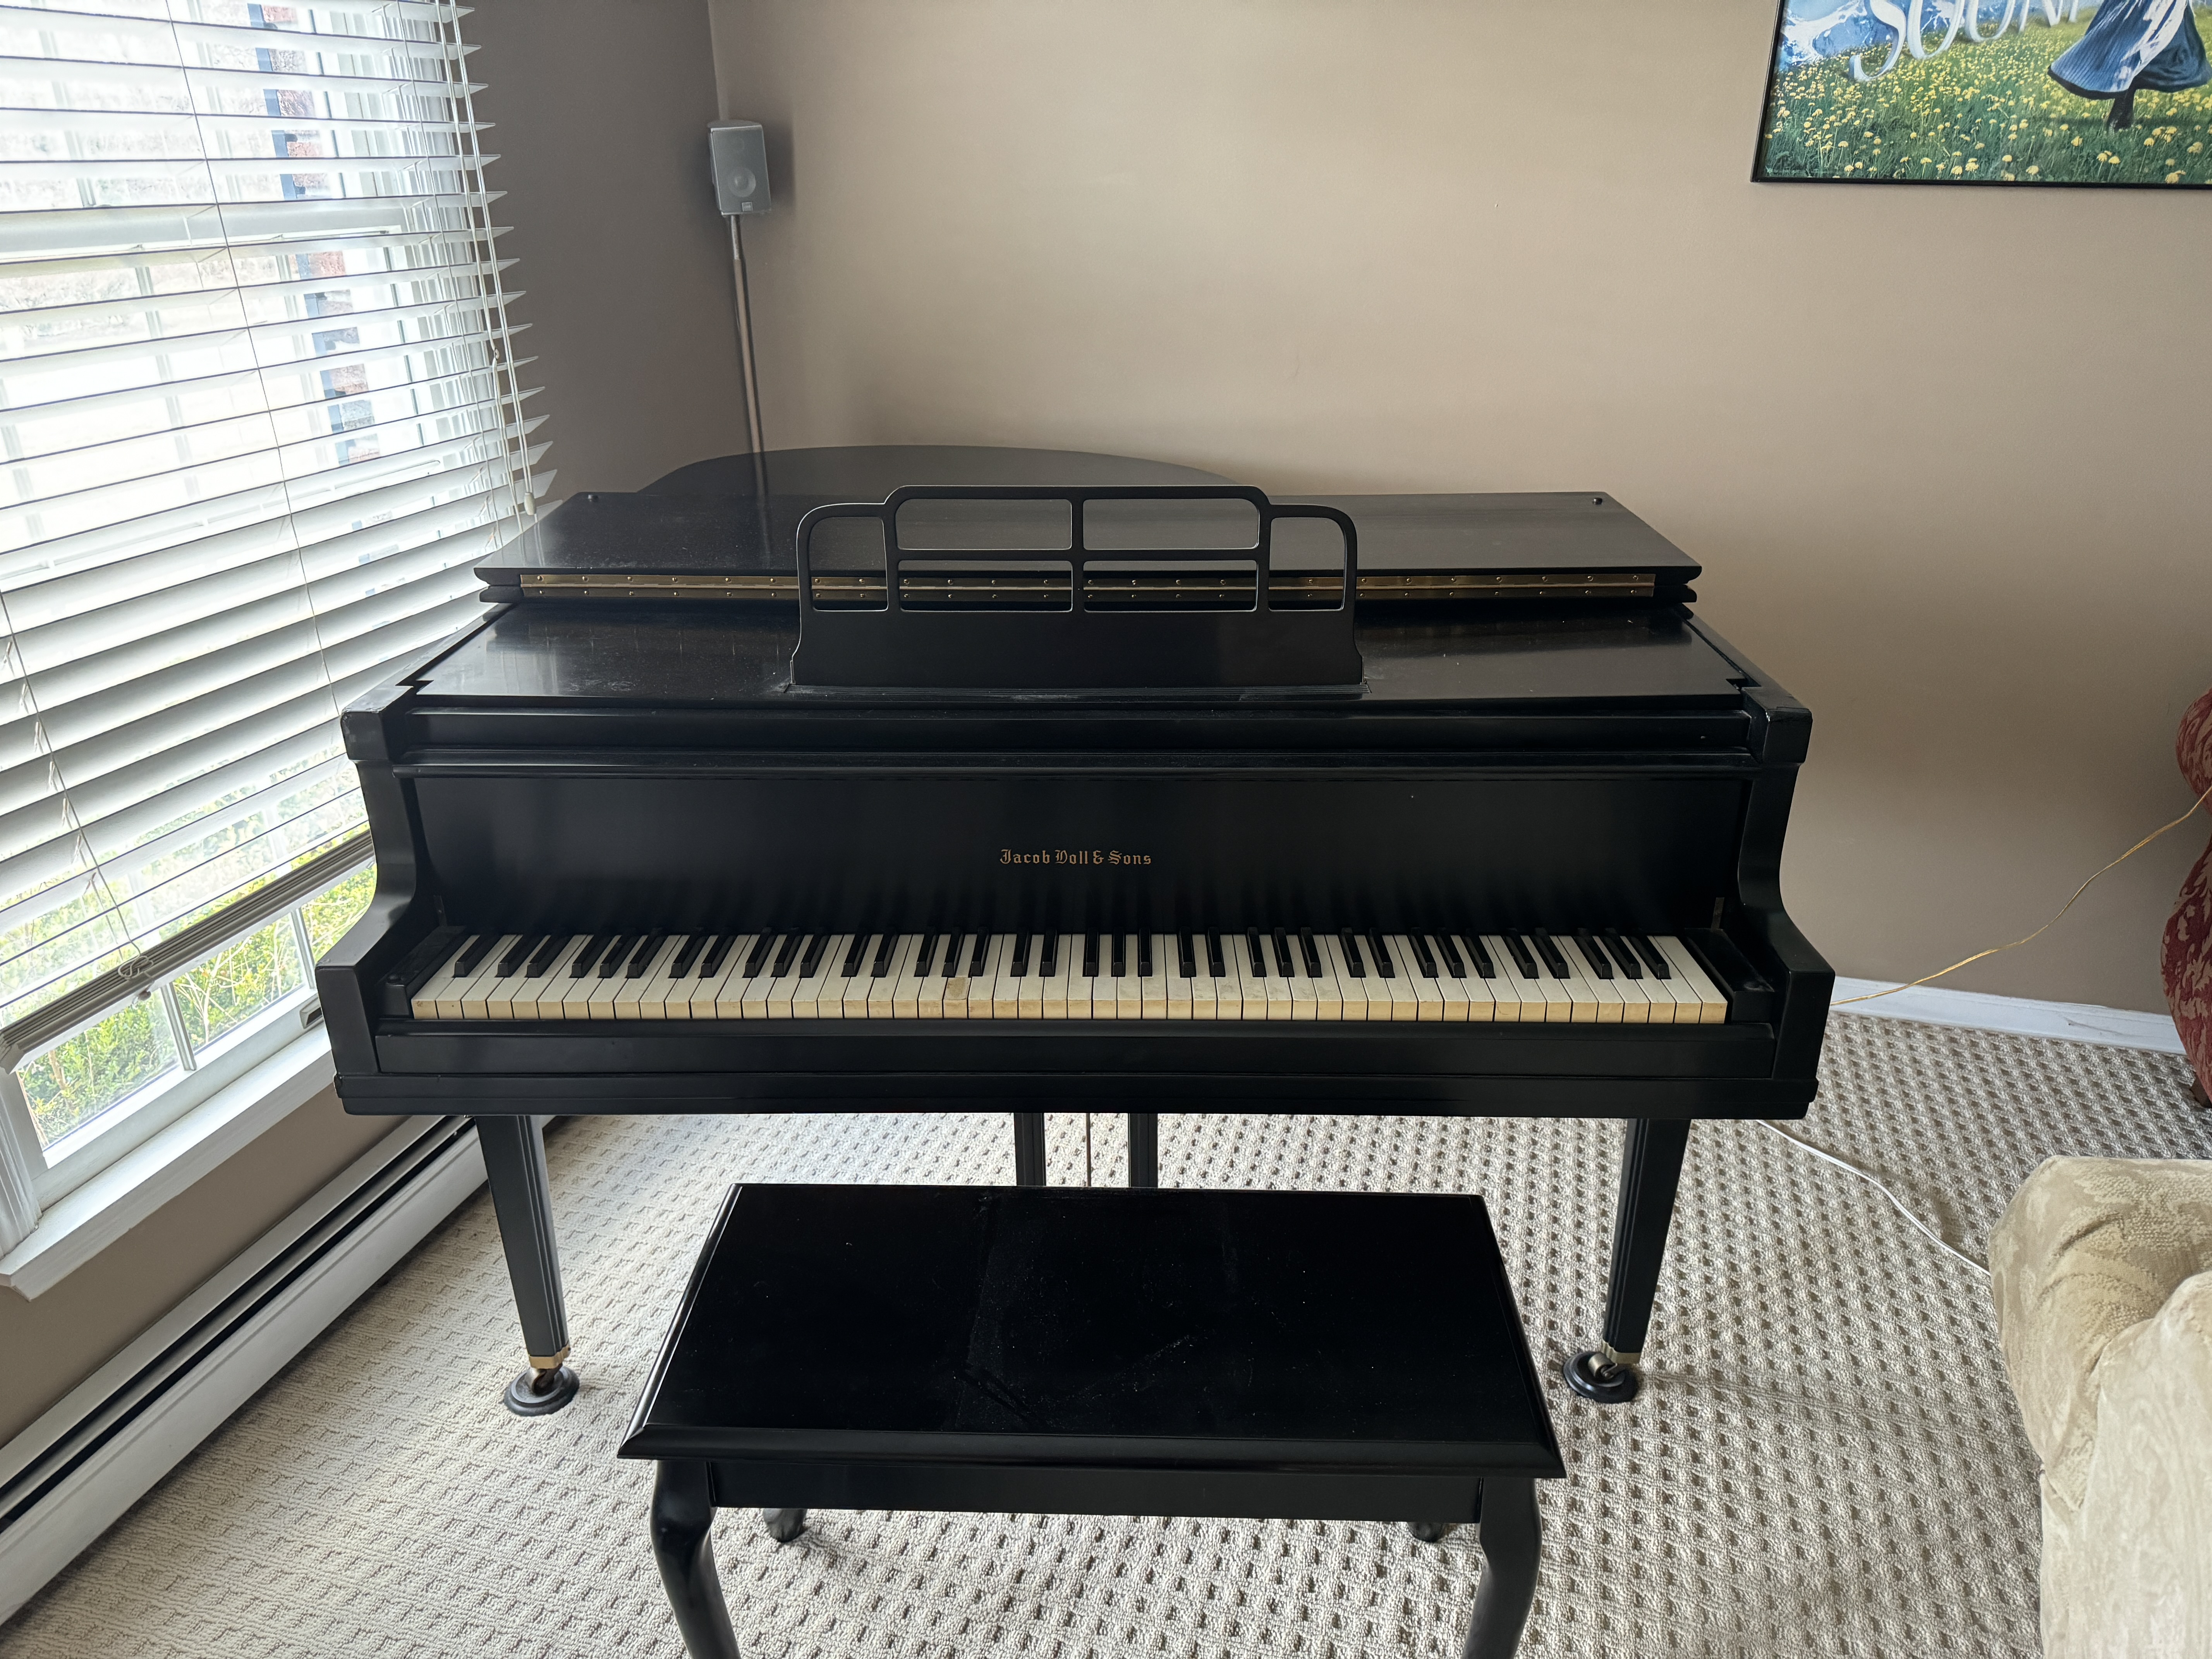 Jacob Doll & Sons Baby Grand Piano 